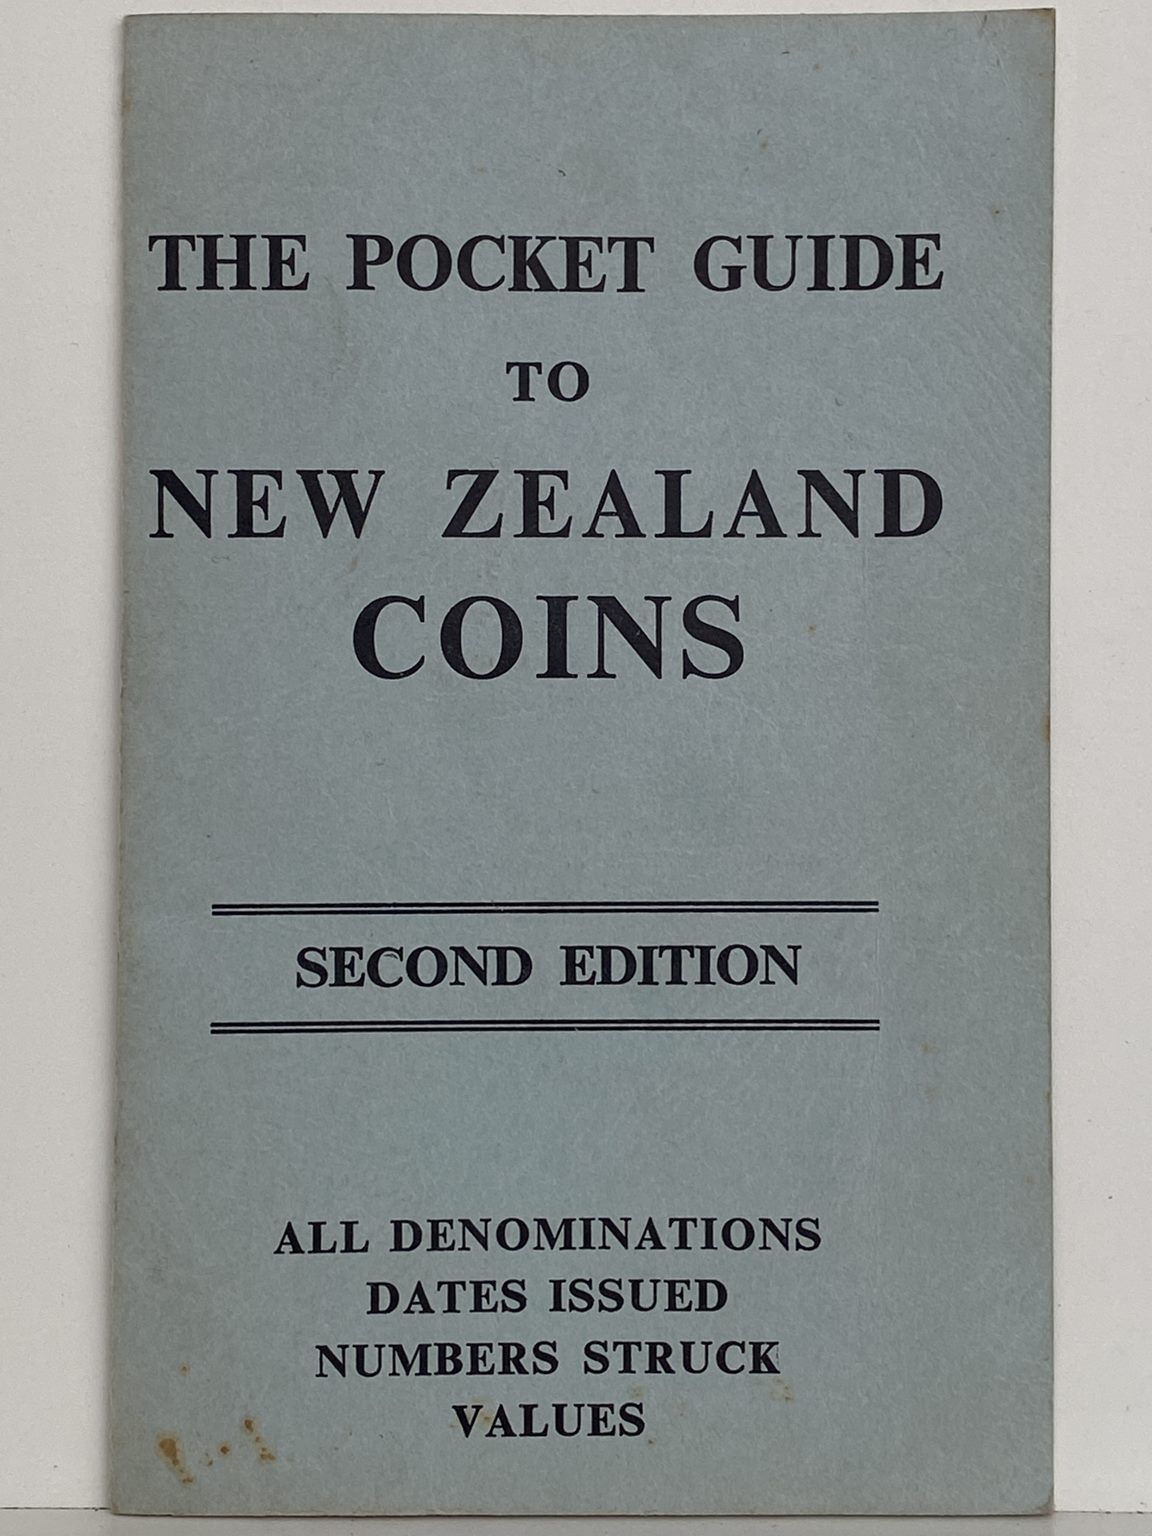 Pocket Guide to NEW ZEALAND COINS